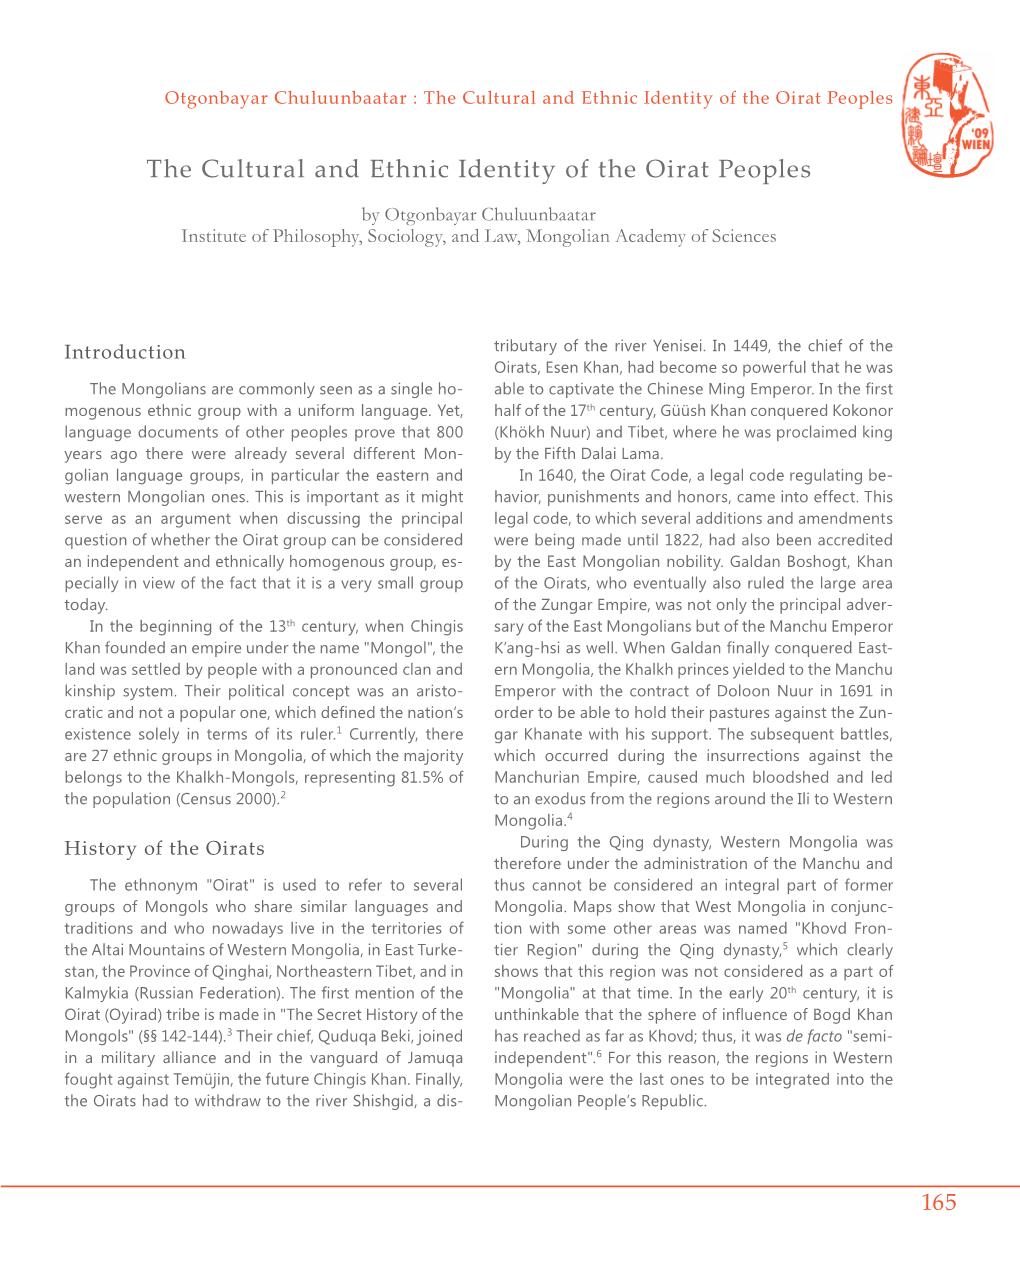 The Cultural and Ethnic Identity of the Oirat Peoples